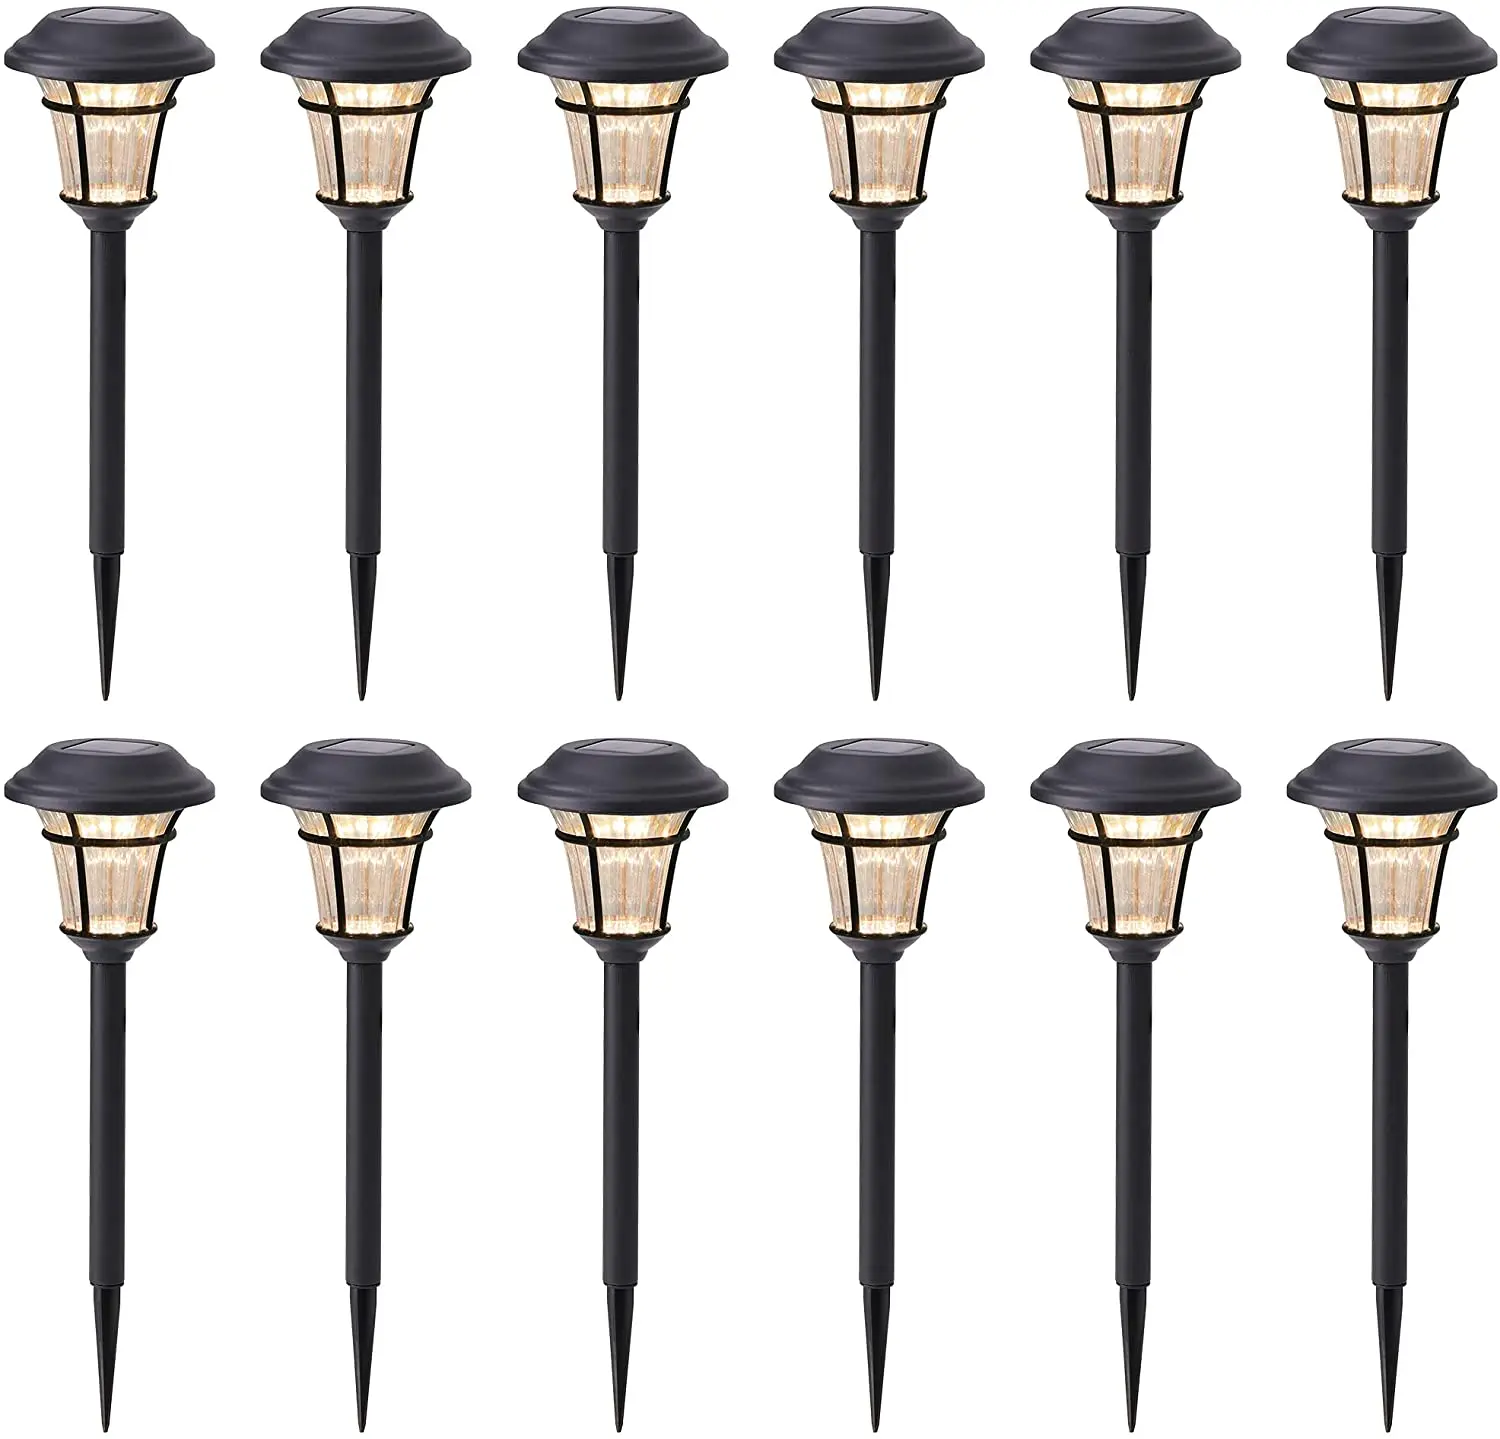 12 Pack Solar Pathway Lights Outdoor Solar Garden Lights for Patio, Yard, Driveway garden decoration pot with lights